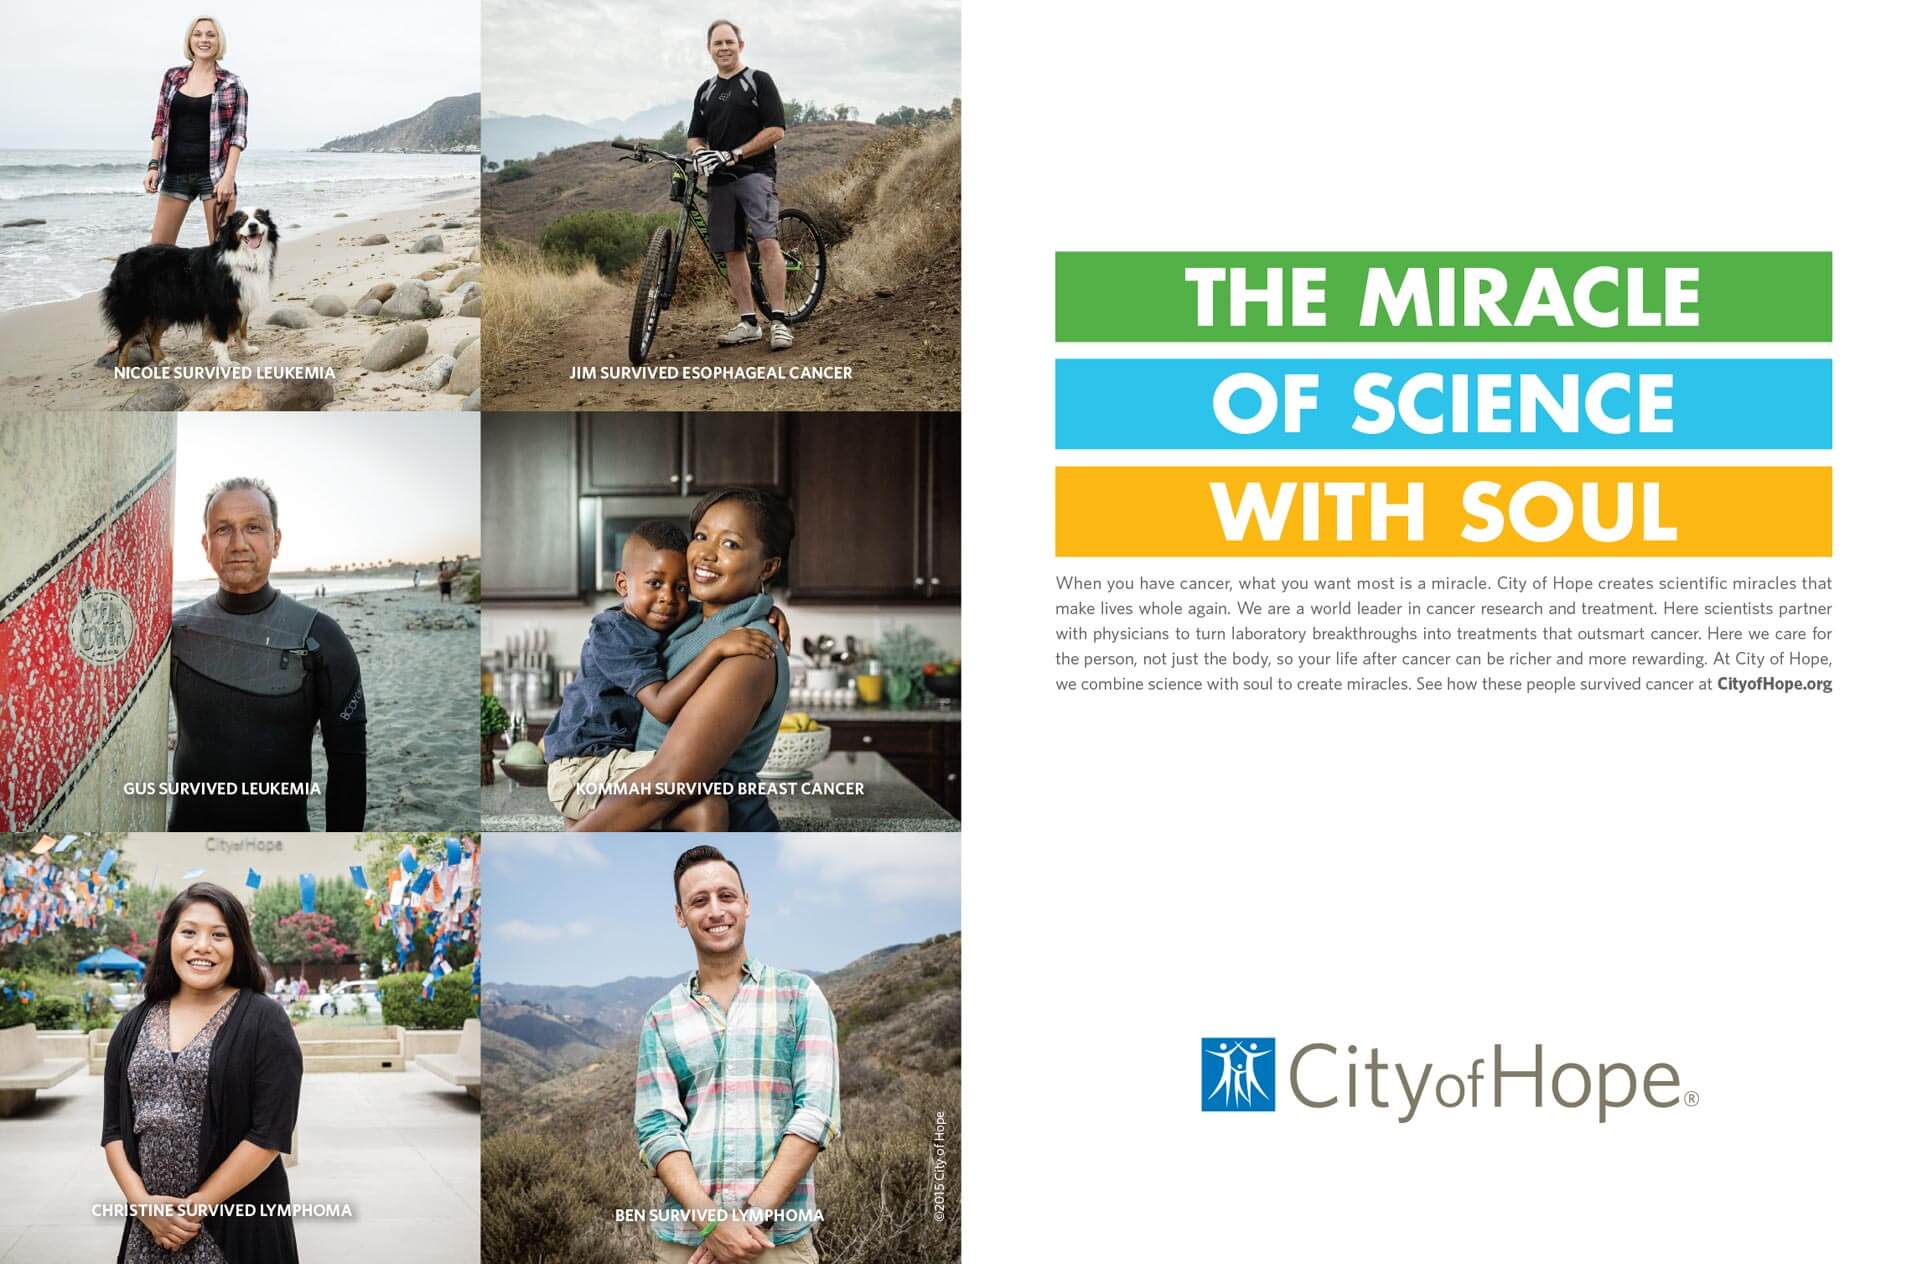 City of Hope. The miracle of science with soul